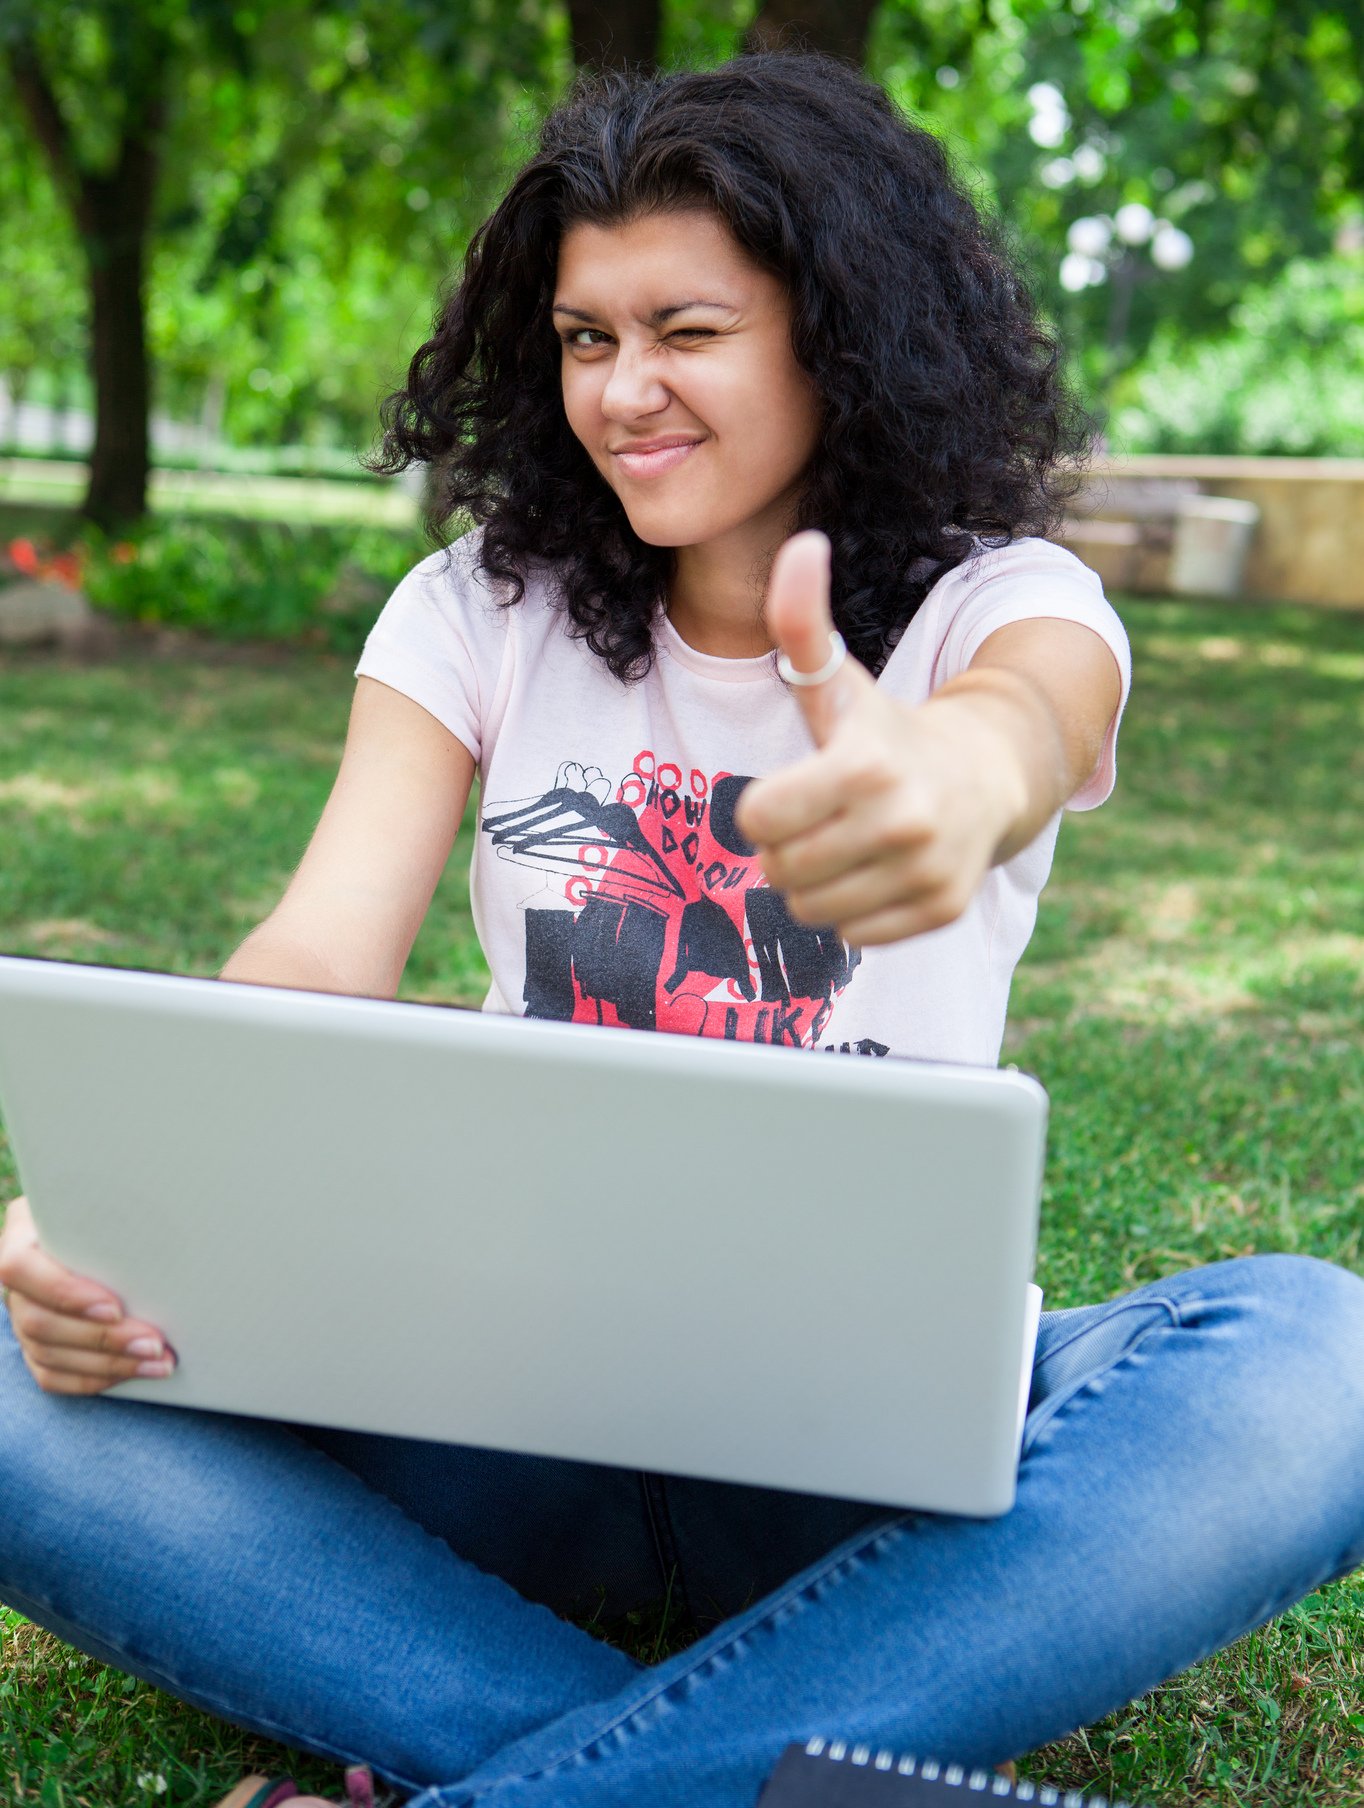 A college girl on her laptop in the park giving the thumbs up sign